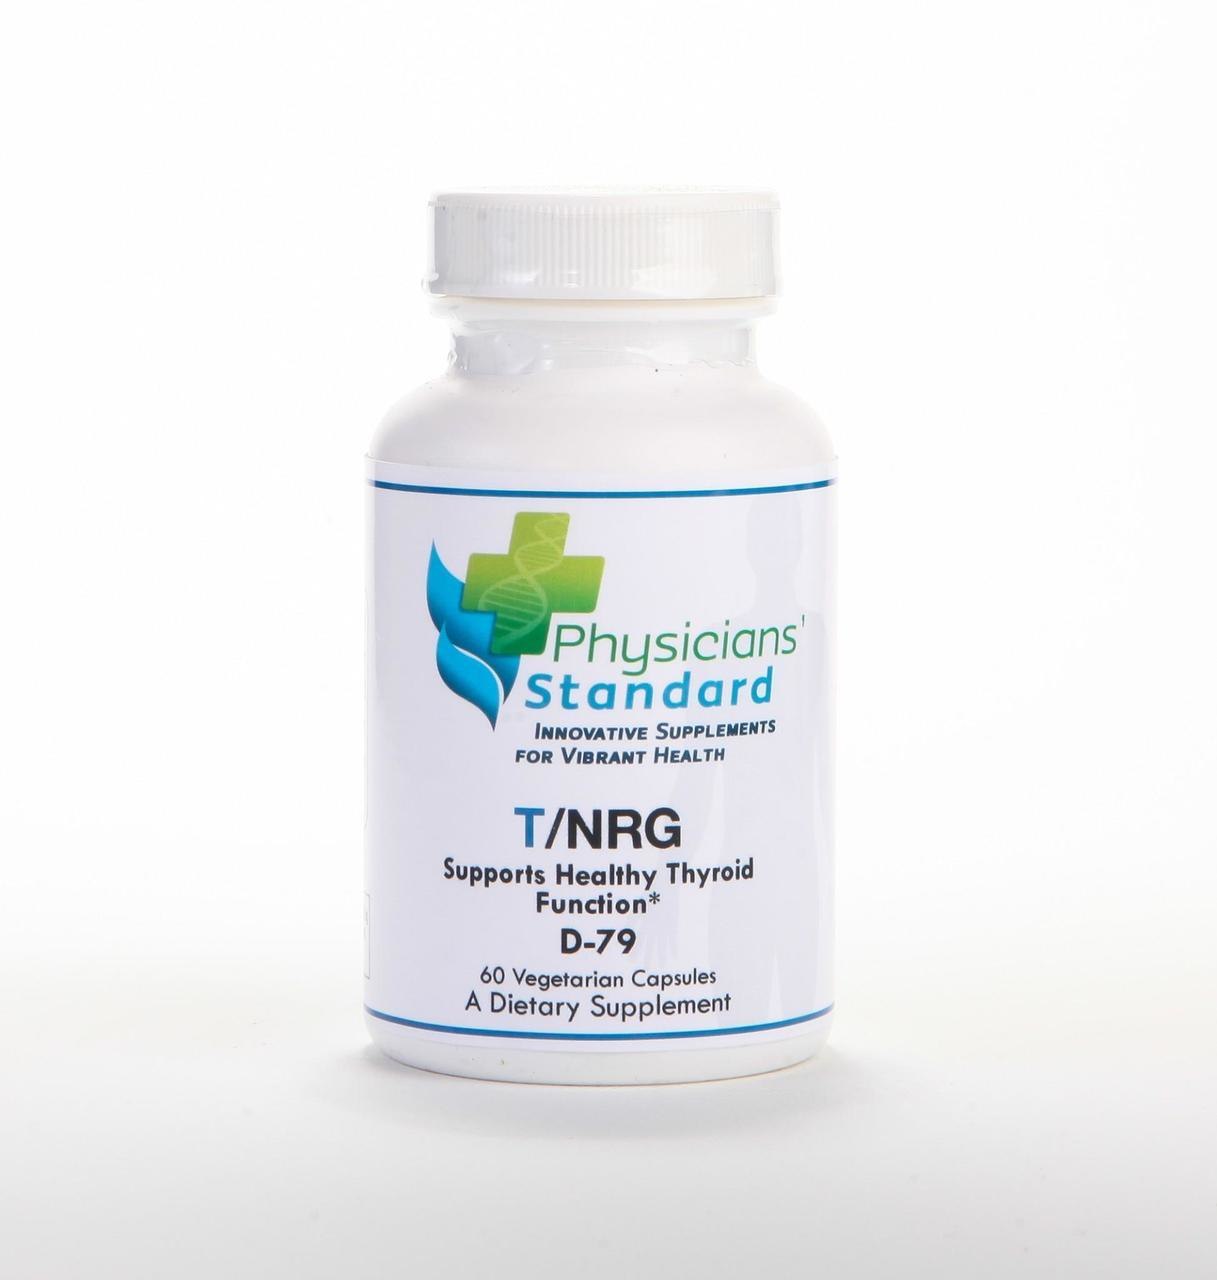 T/NRG by Physicians' Standard